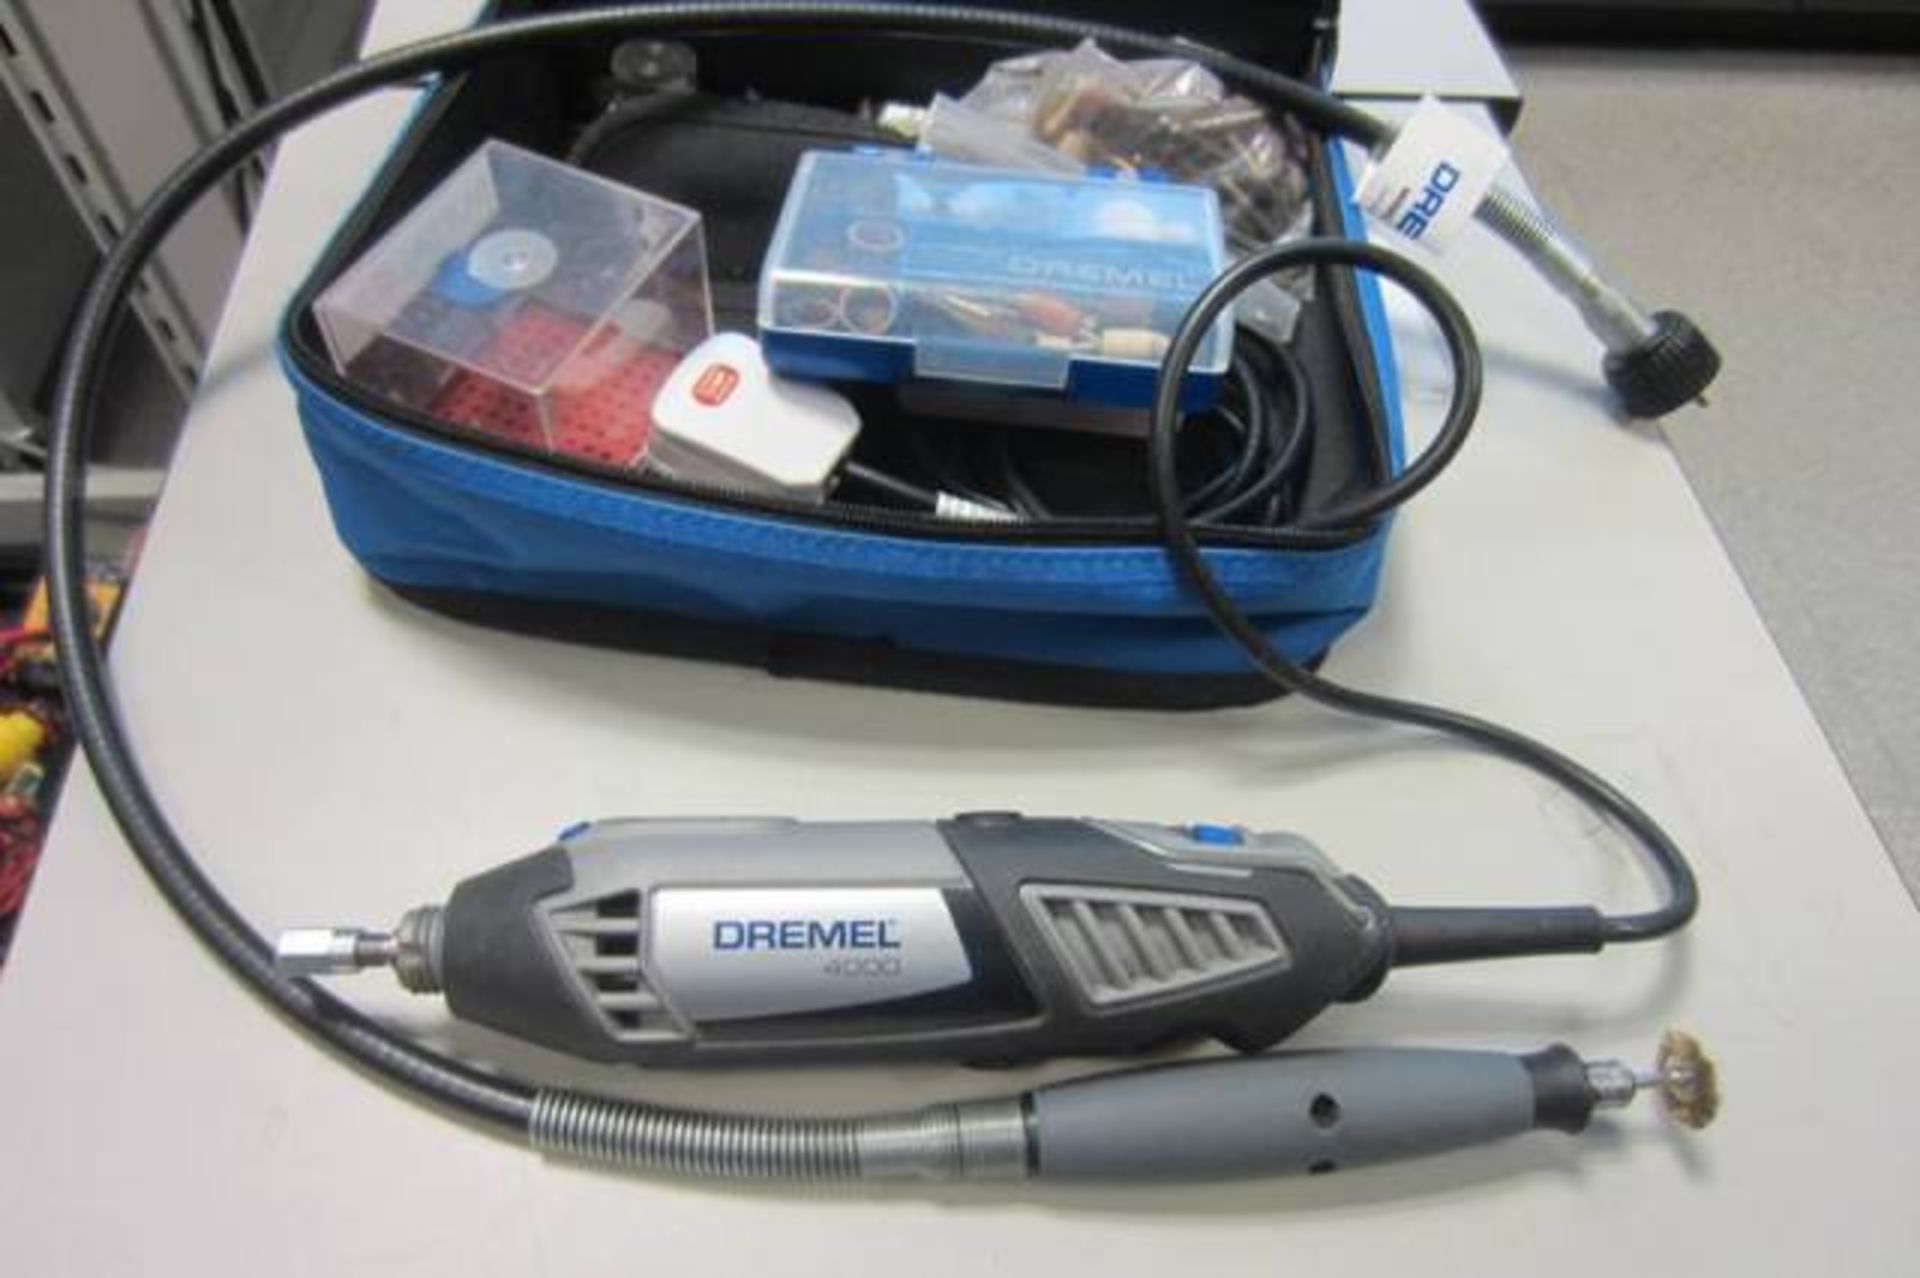 Dremel 4000 in Case with Selection of Accessories (As Viewed)